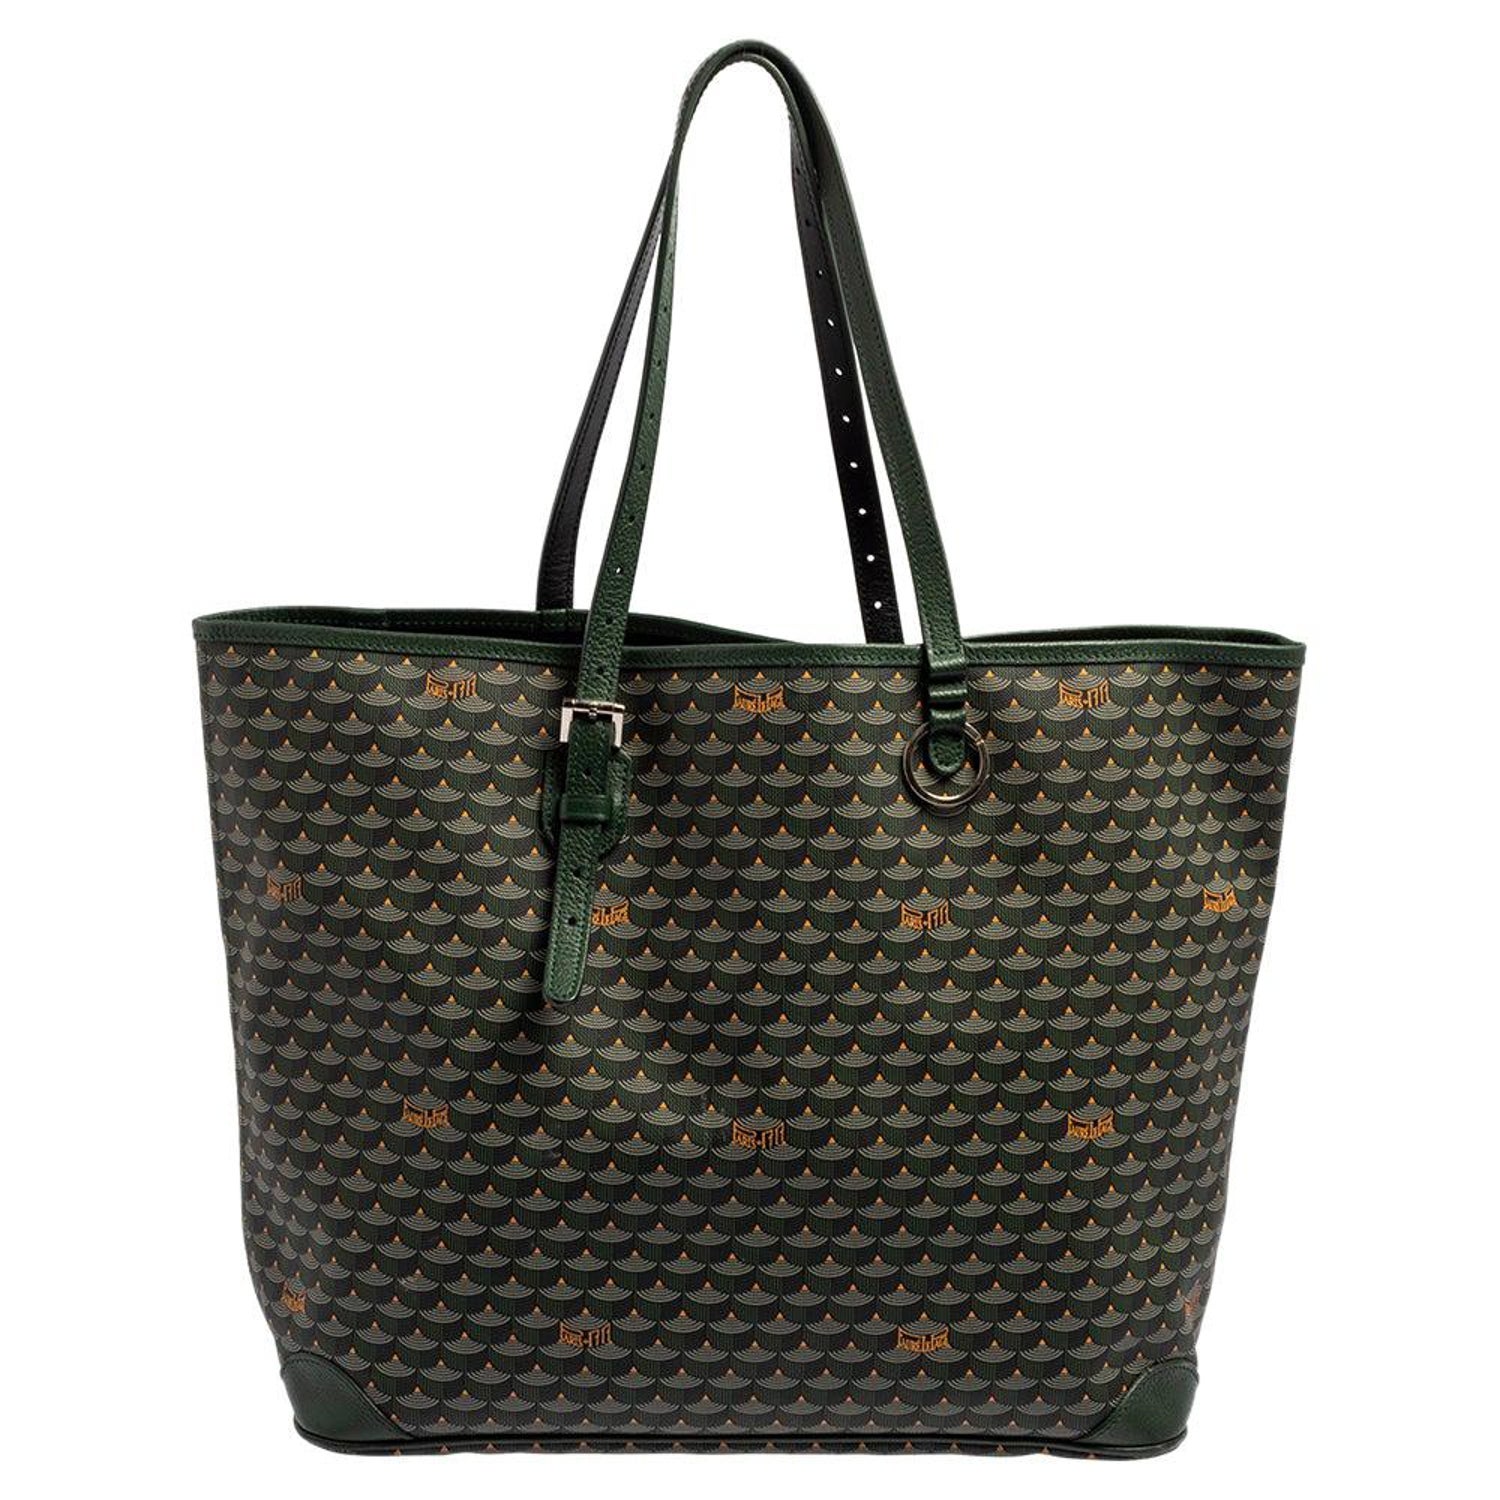 Sold at Auction: Faure le Page, Faure le Page DAILY BATTLE 37 Tote Bag